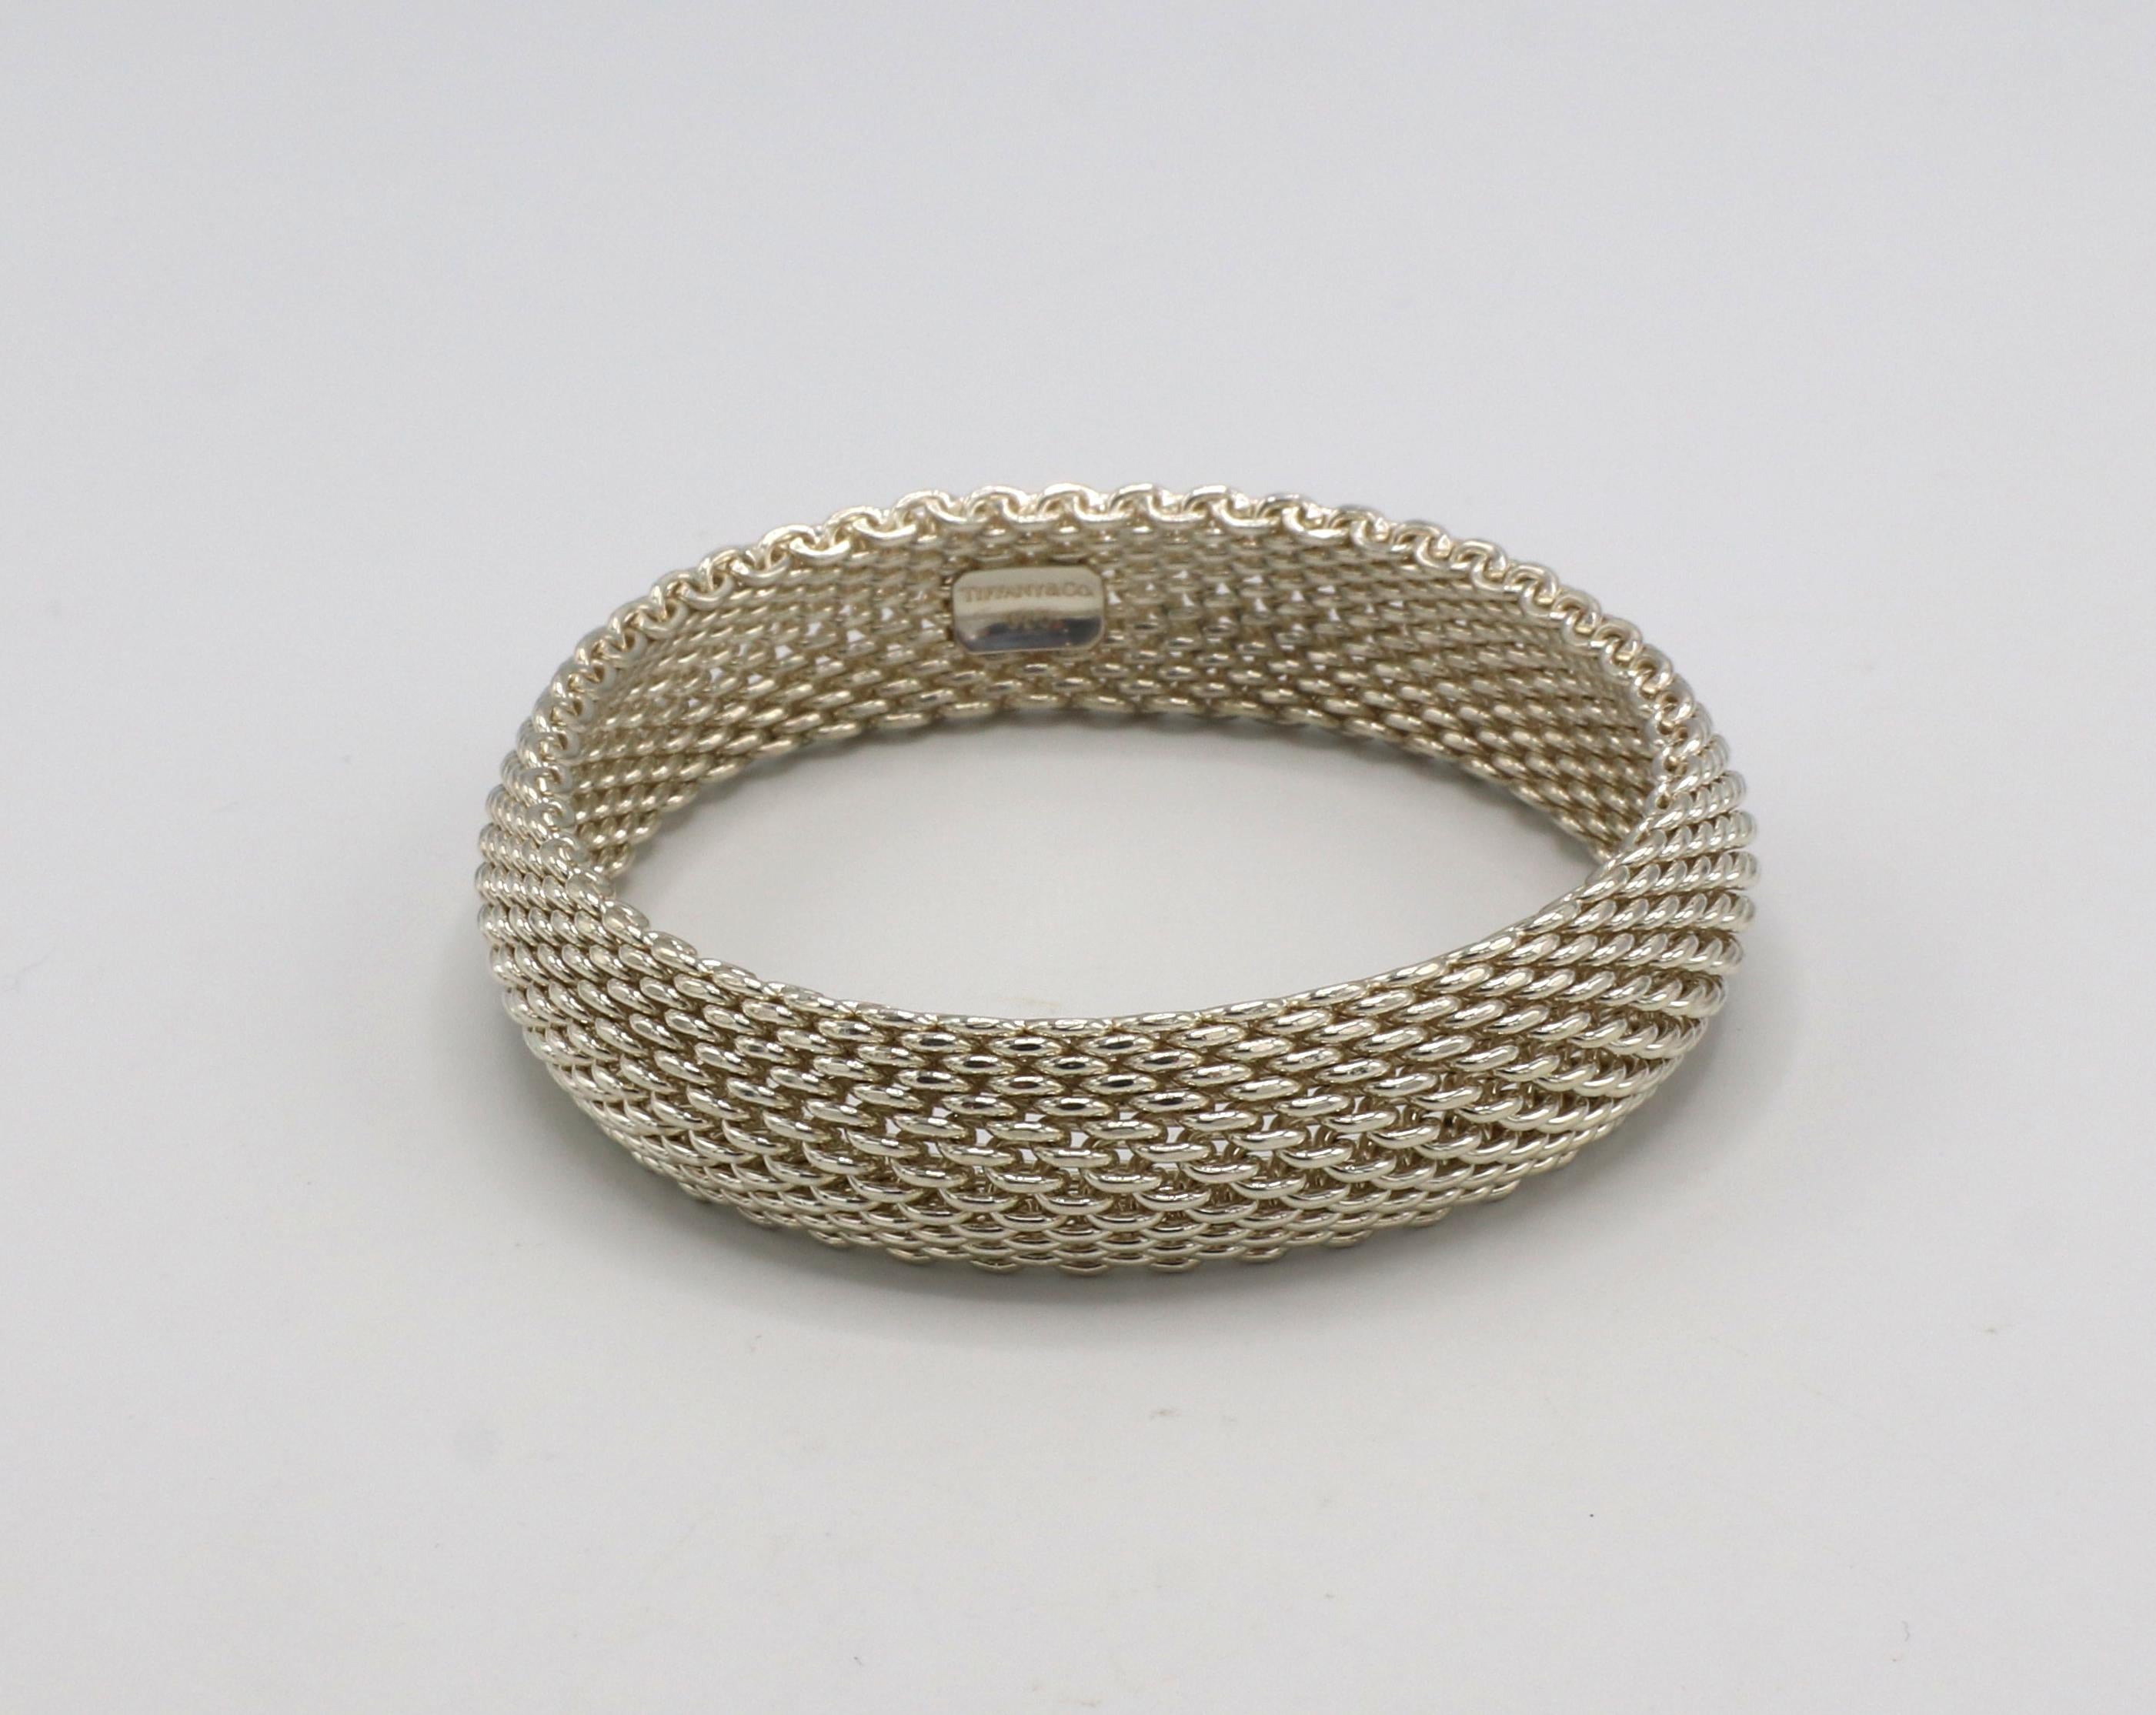 Tiffany & Co. Somerset Sterling Silver Mesh Bracelet 
Metal: Sterling silver
Weight: 58.2 grams
Width: 14mm
Circumference: Approx. 7.75